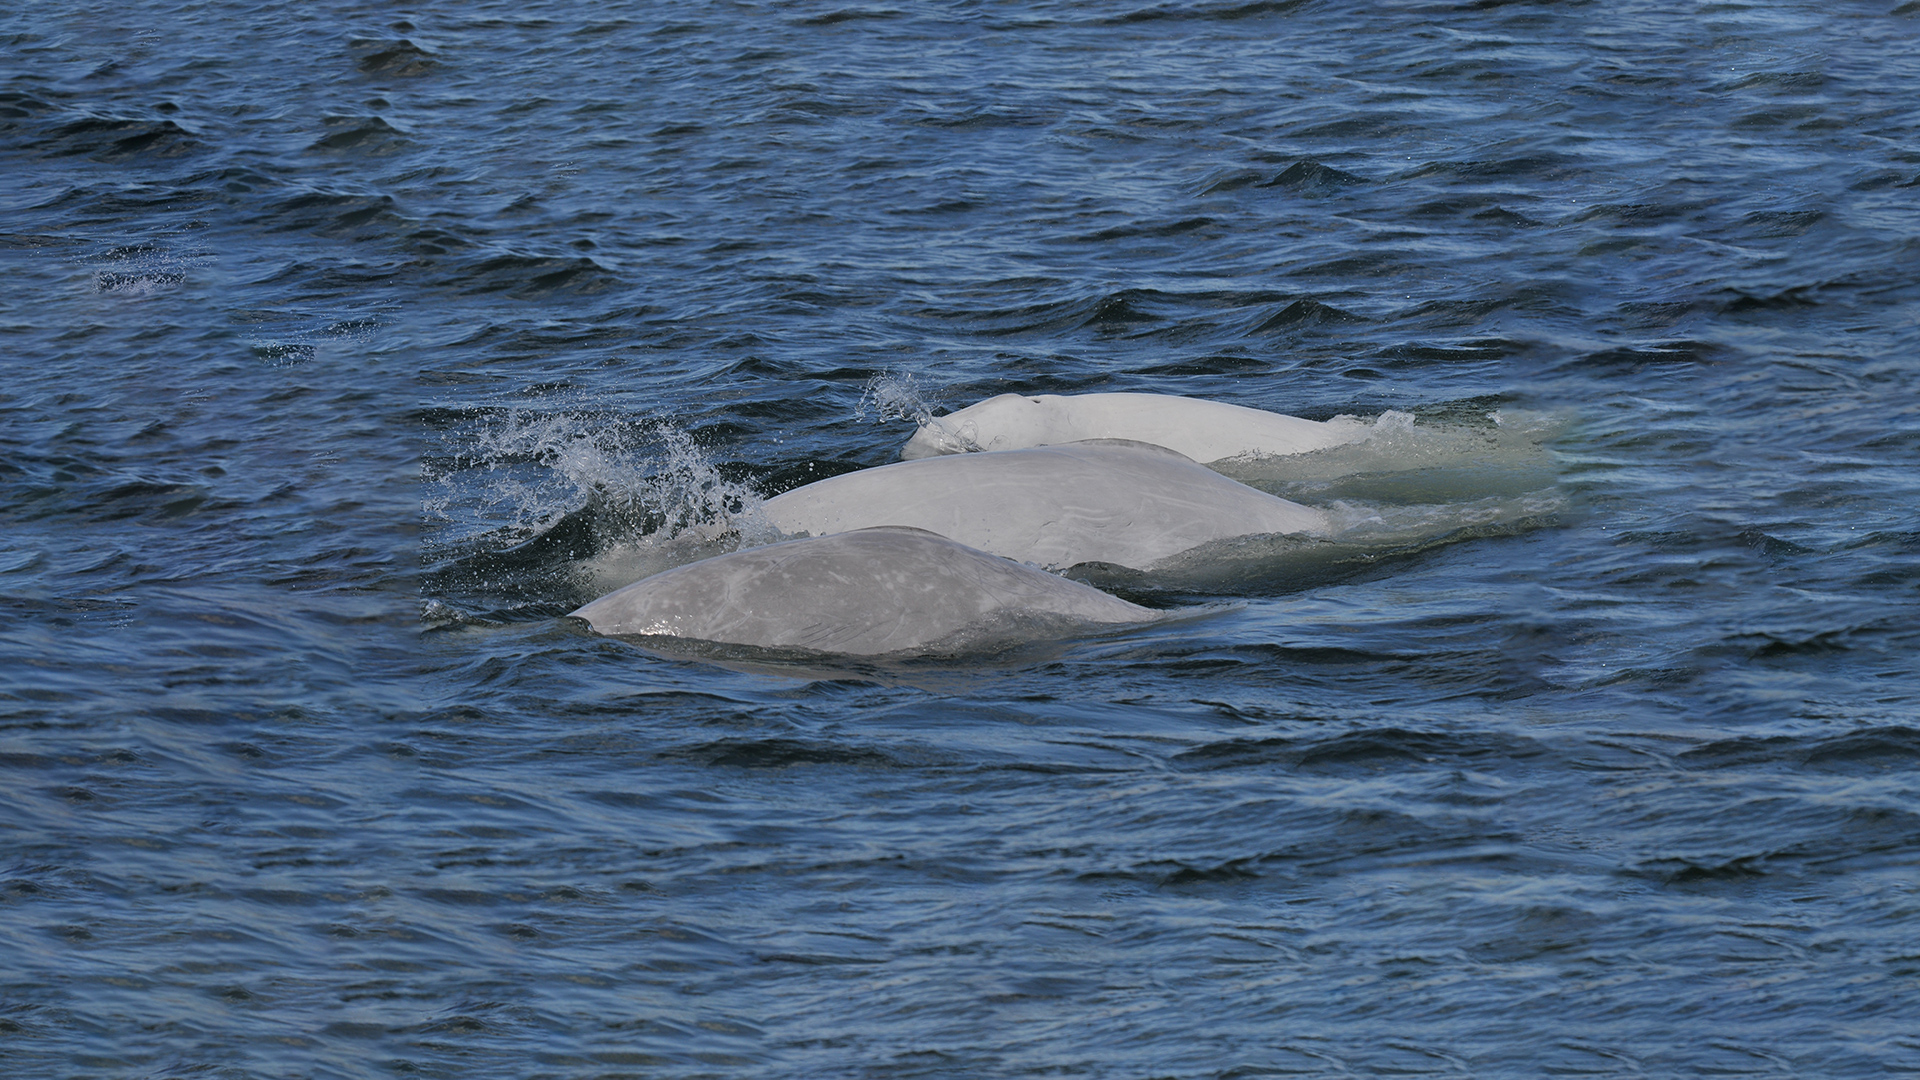 Photo of the backs of three belugas: one dark grey, one pale grey and one almost completely white.